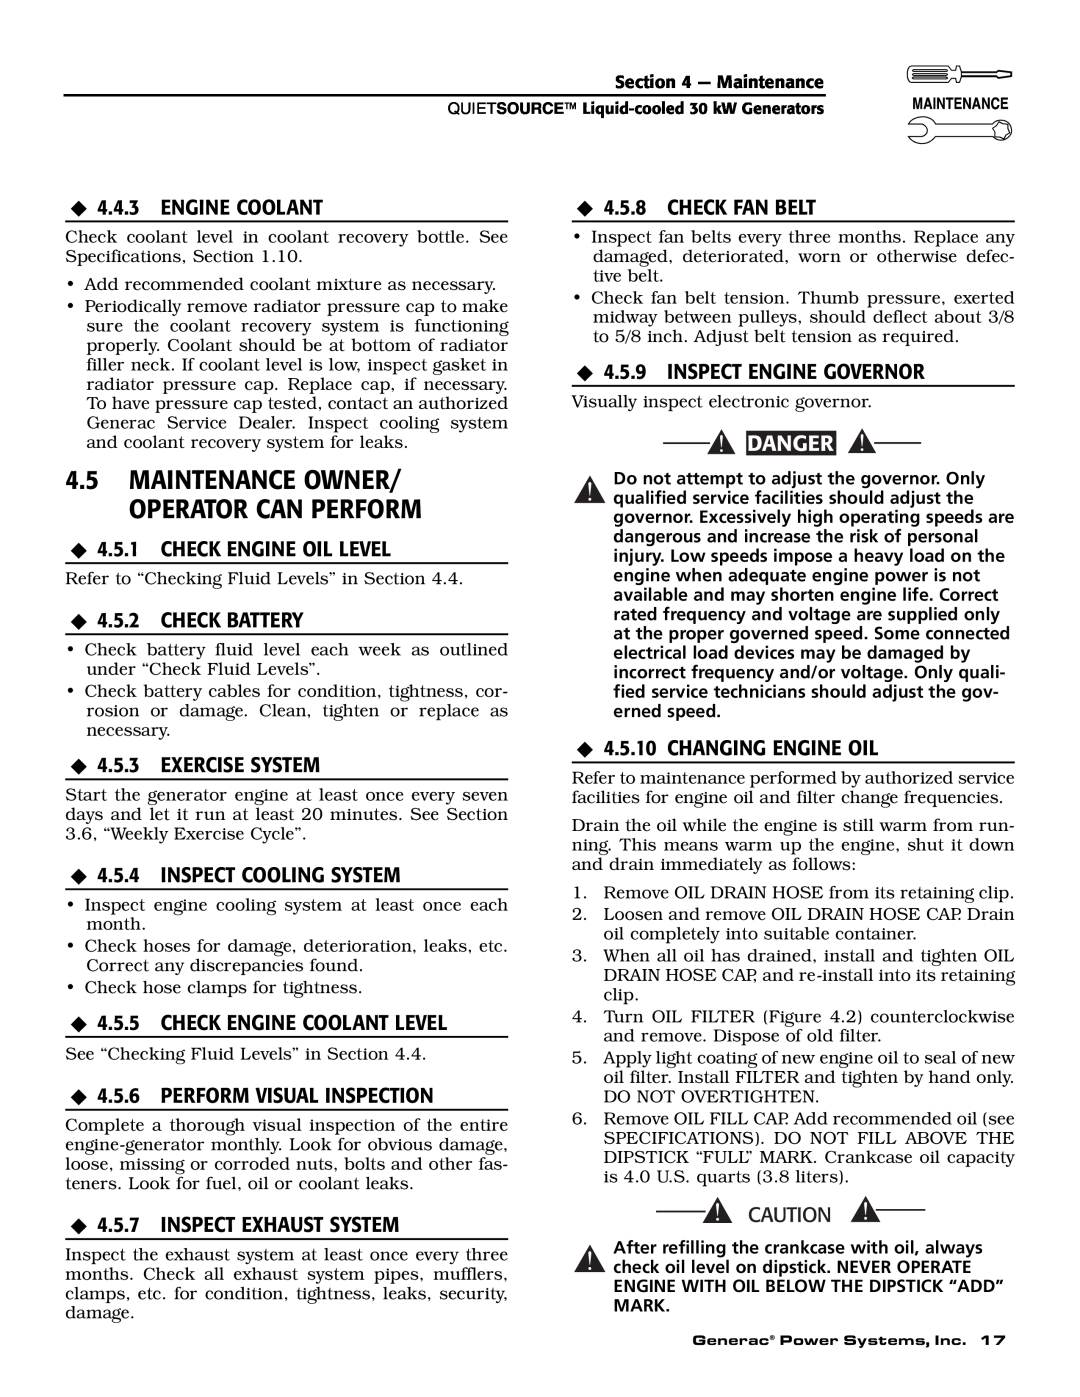 Generac Power Systems 004917-3 owner manual 4.5MAINTENANCE OWNER/ OPERATOR CAN PERFORM, Danger 